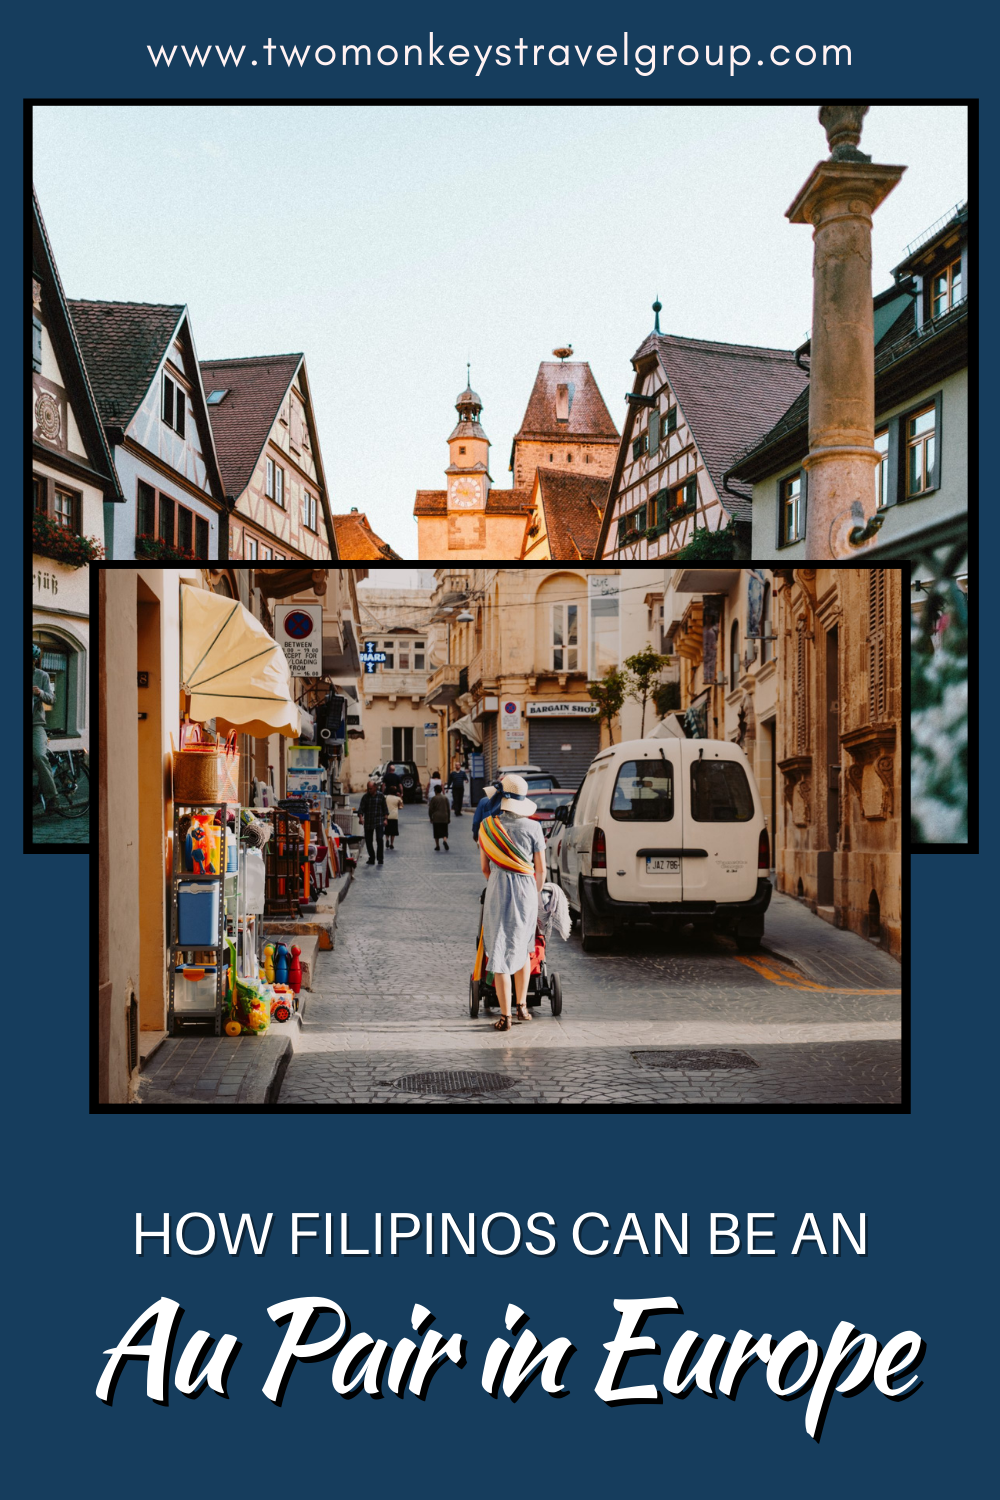 How Filipinos can be an Au Pair in Europe – Work and Travel Legally